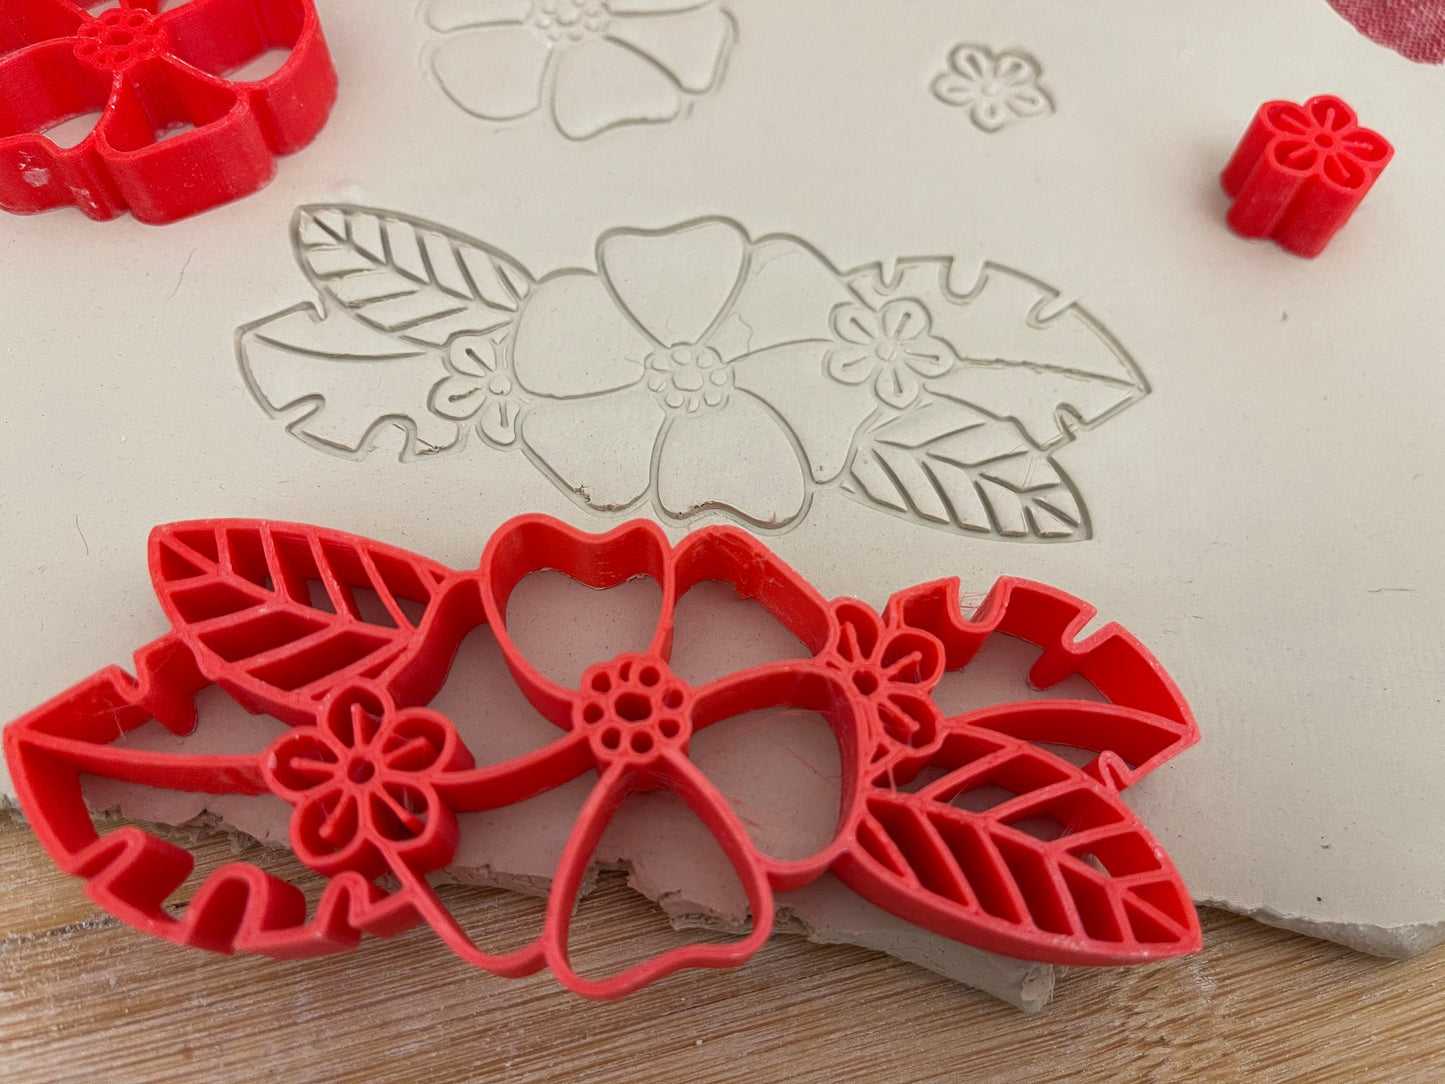 Tropical flower bunch stamp - plastic 3D printed, multiple designs/sizes, Each or sets available